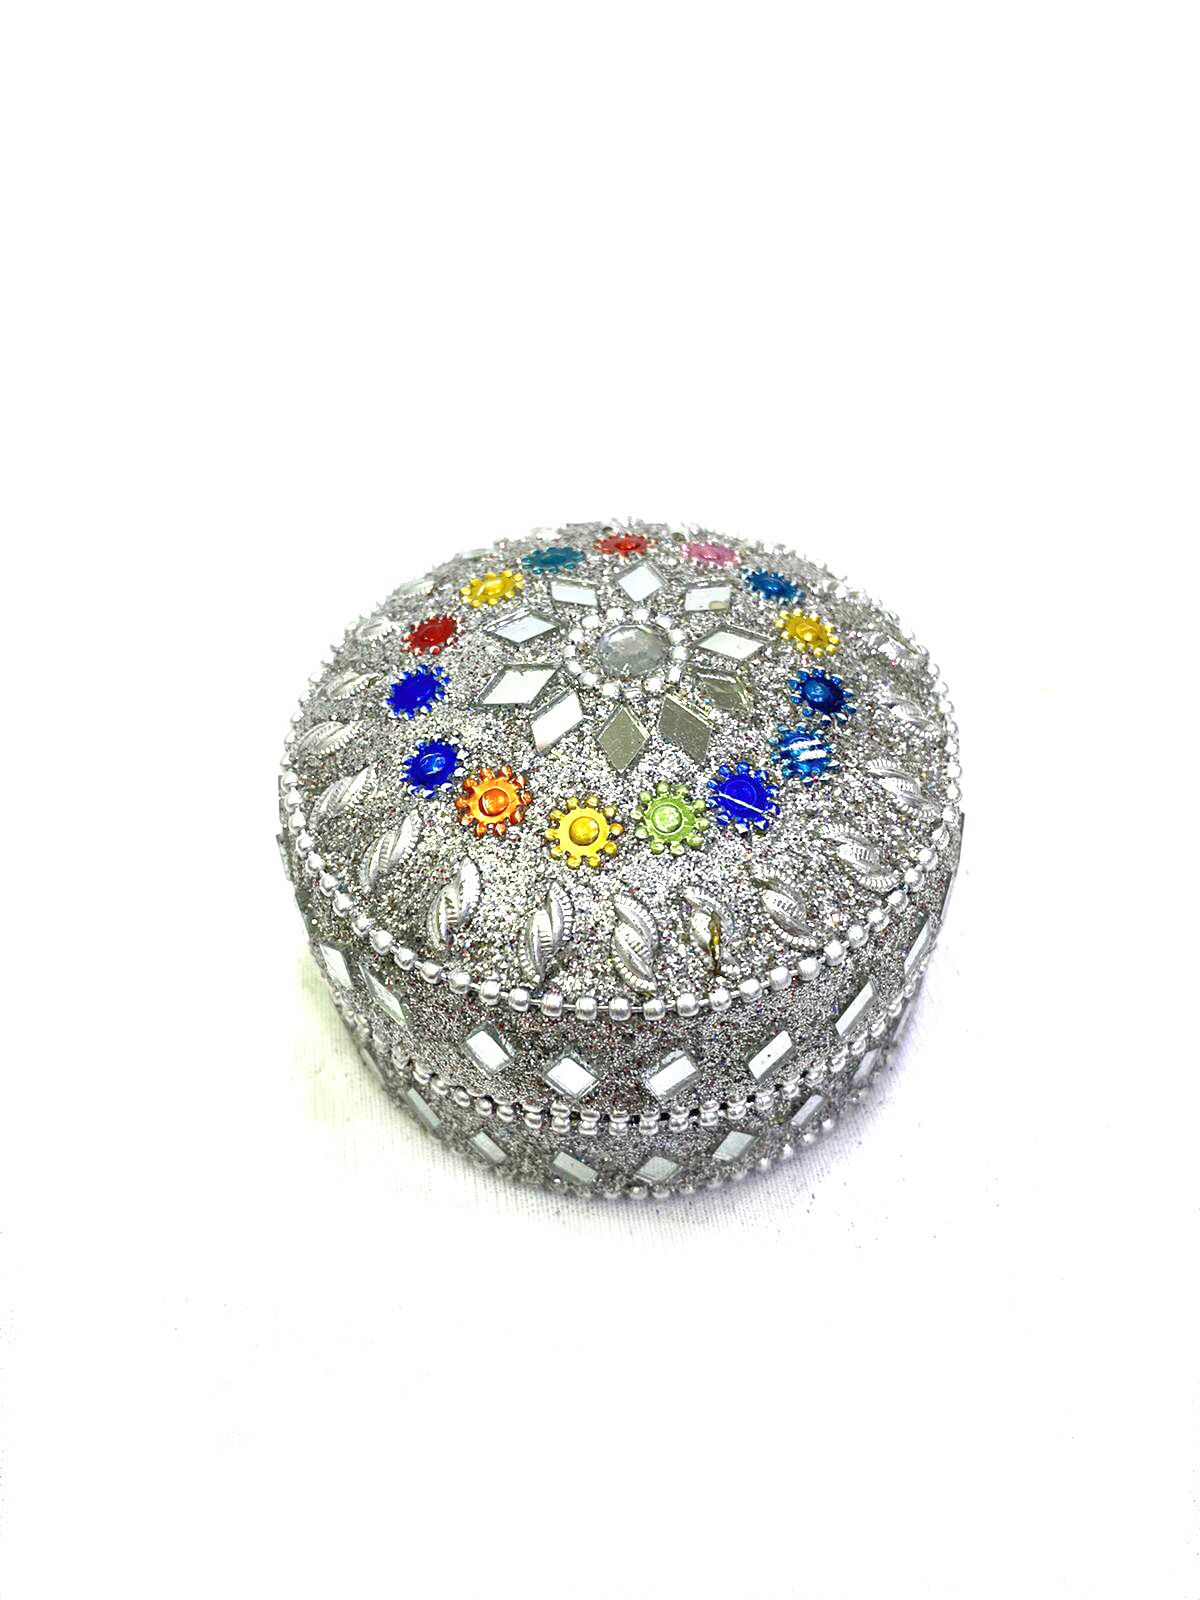 Jewelry Box In Beautiful Shiny Shades Storage Ideas Handcrafted From Tamrapatra